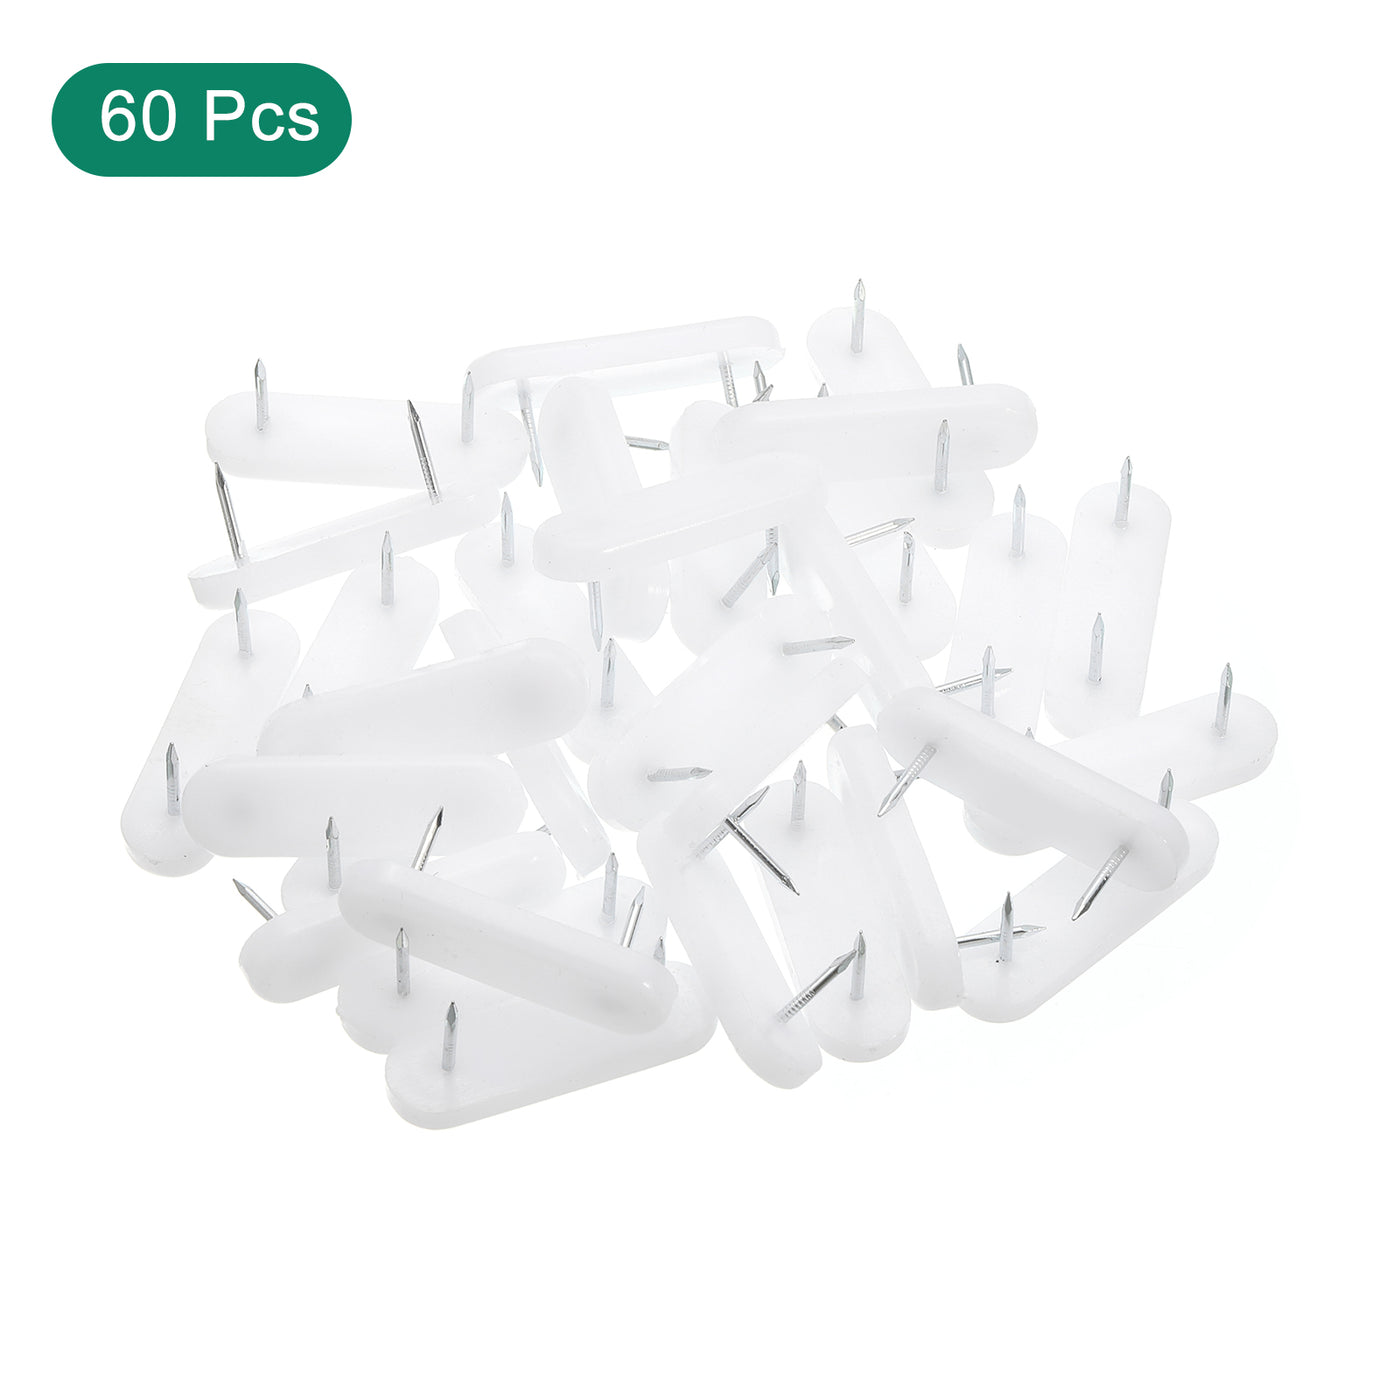 uxcell Uxcell Nail on Furniture Glides, 60pcs Plastic Double Pins Furniture Sliders